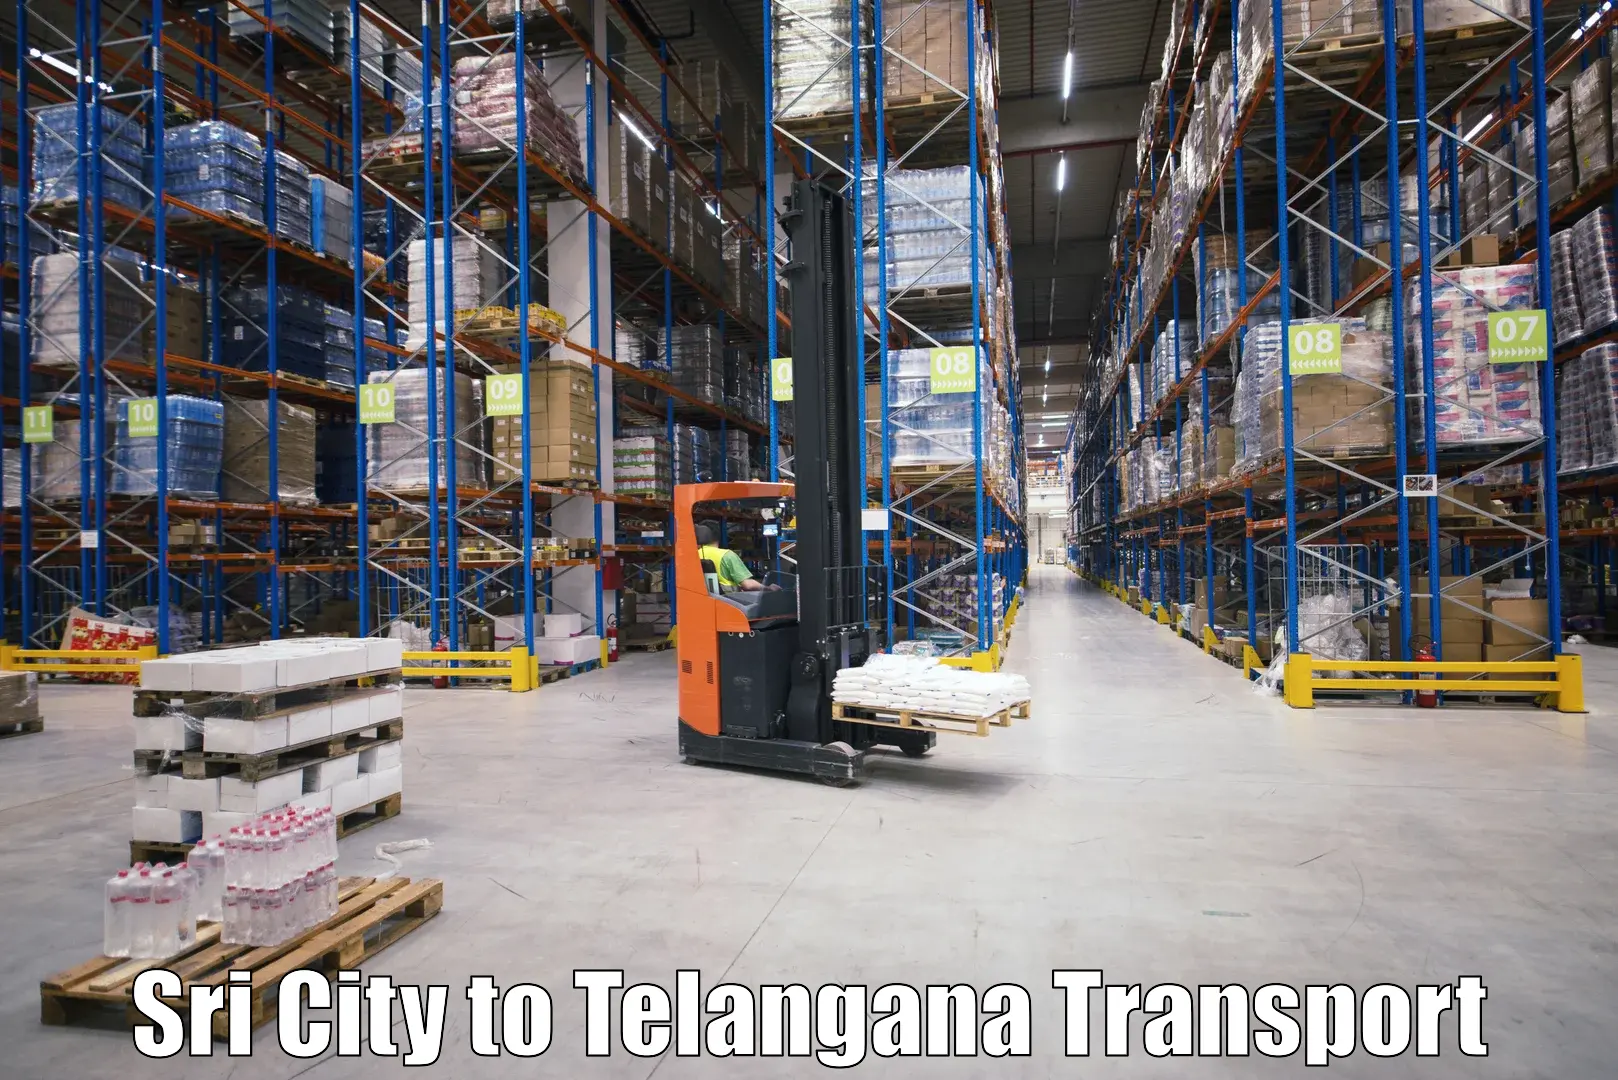 Vehicle transport services Sri City to Sultanabad